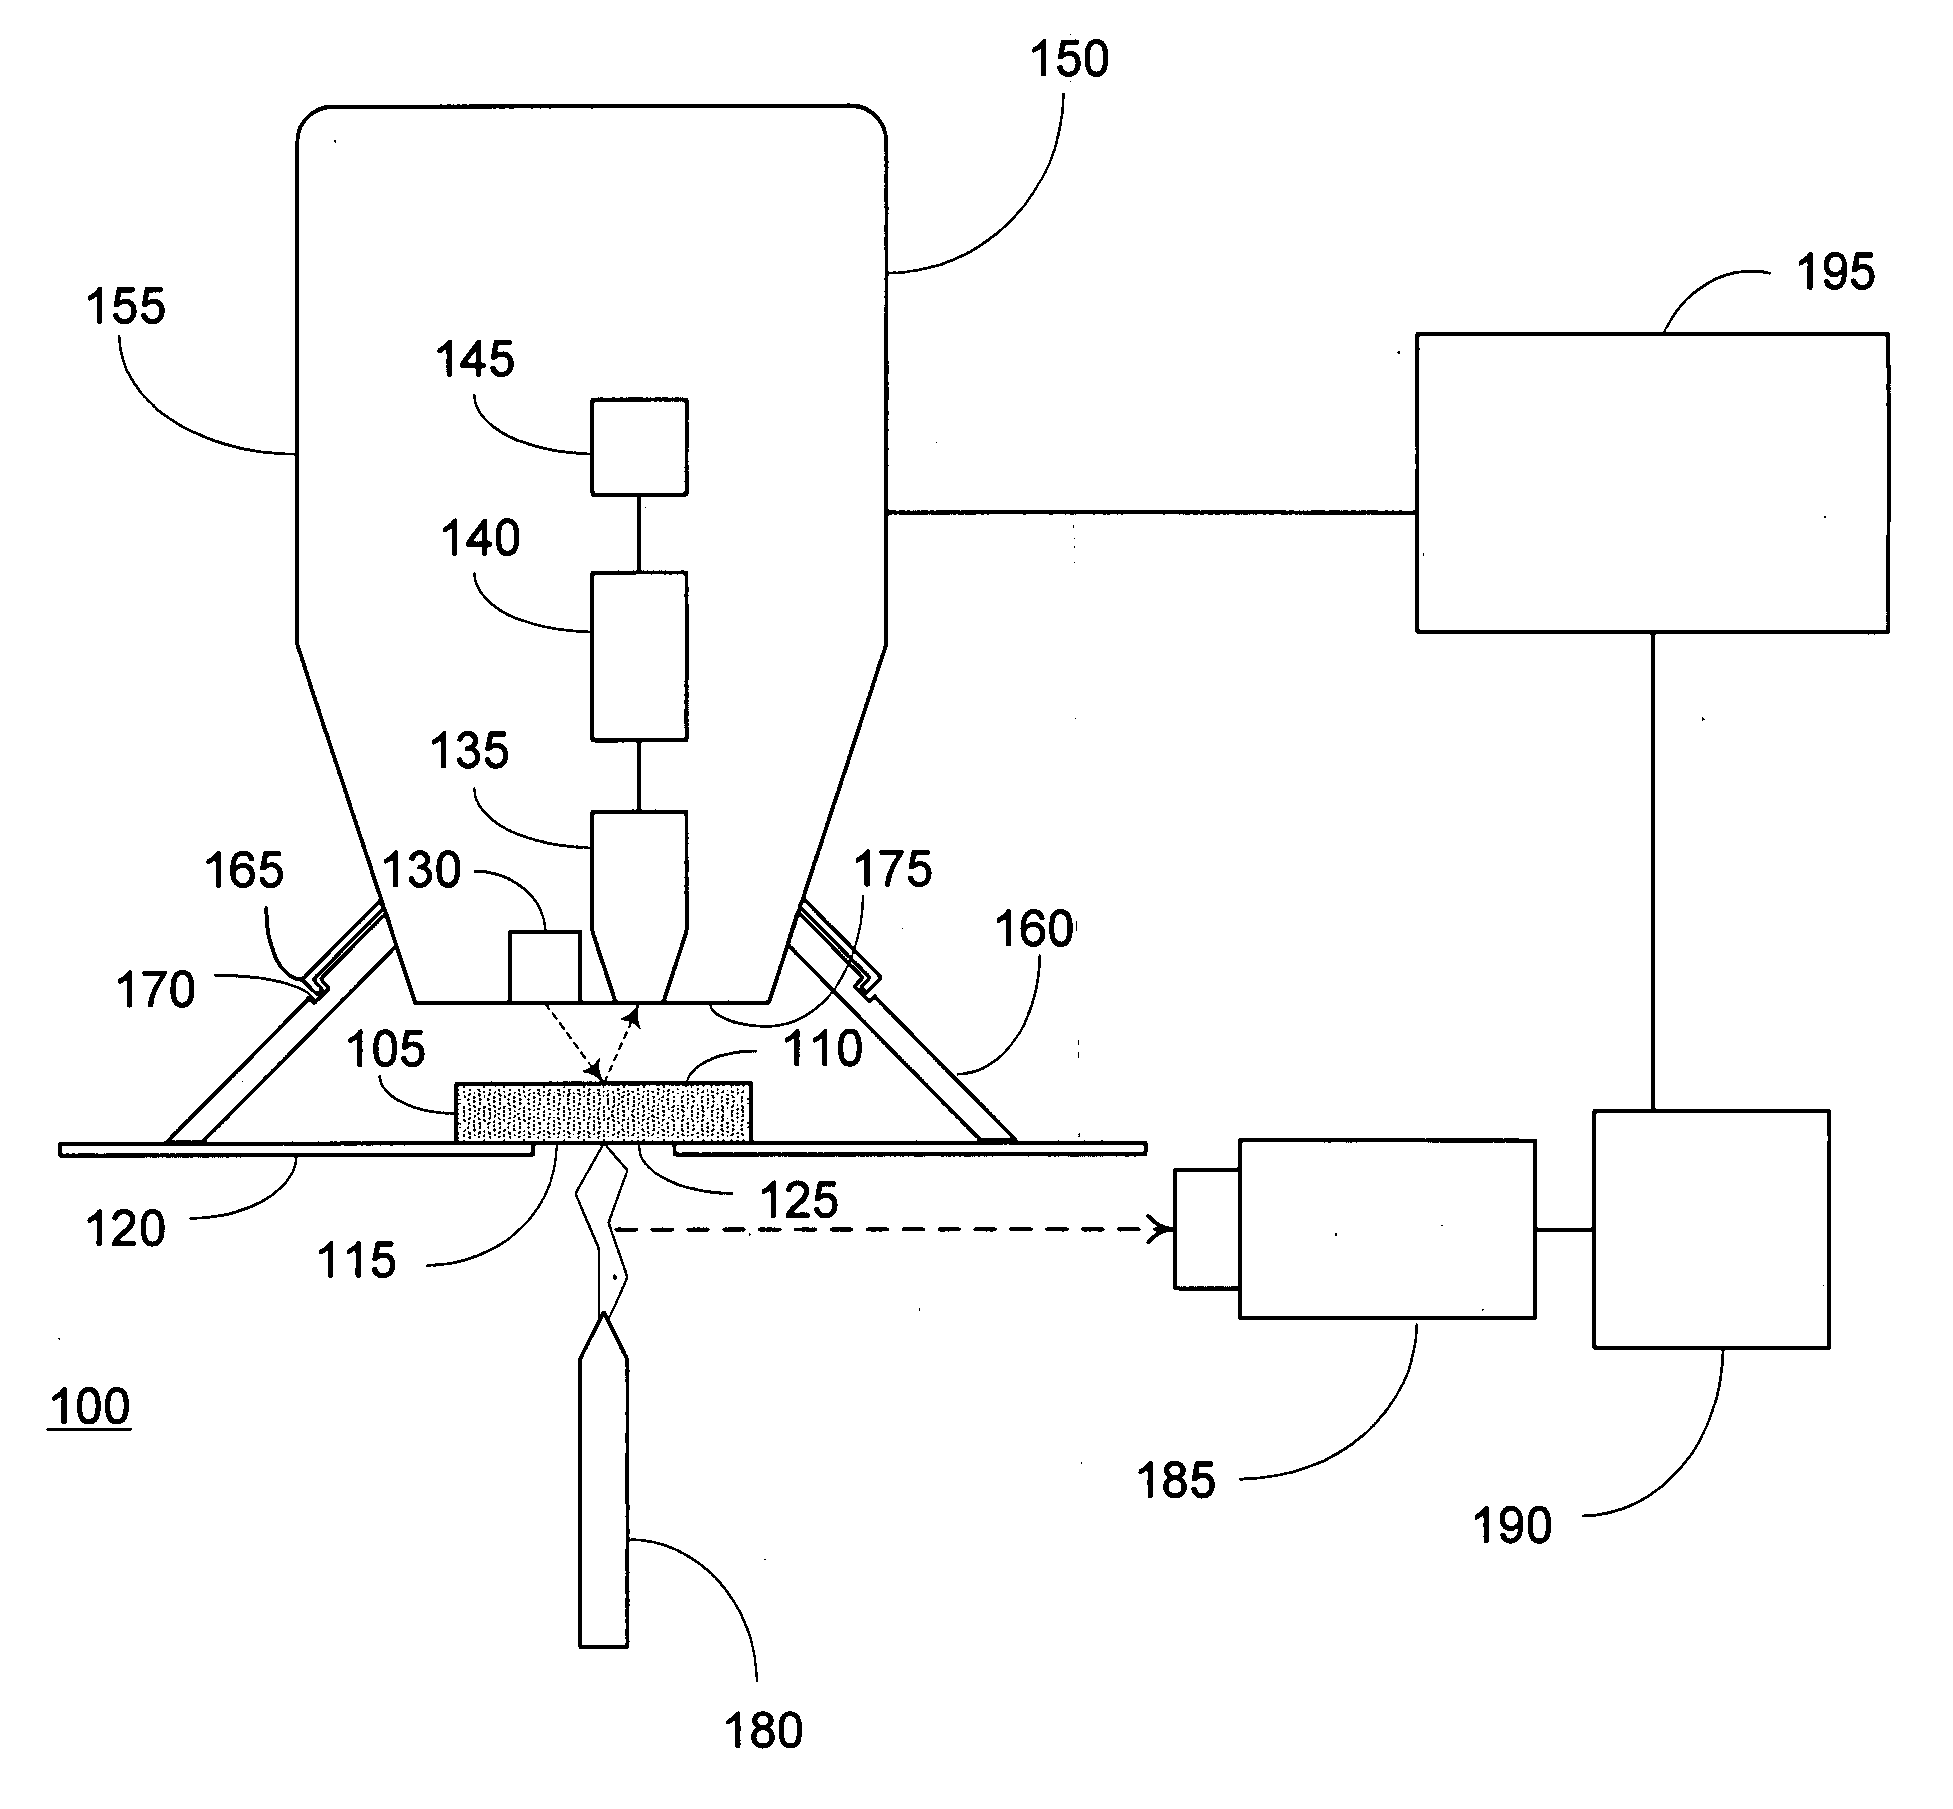 Instrument having x-ray fluorescence and spark emission spectroscopy analysis capabilities